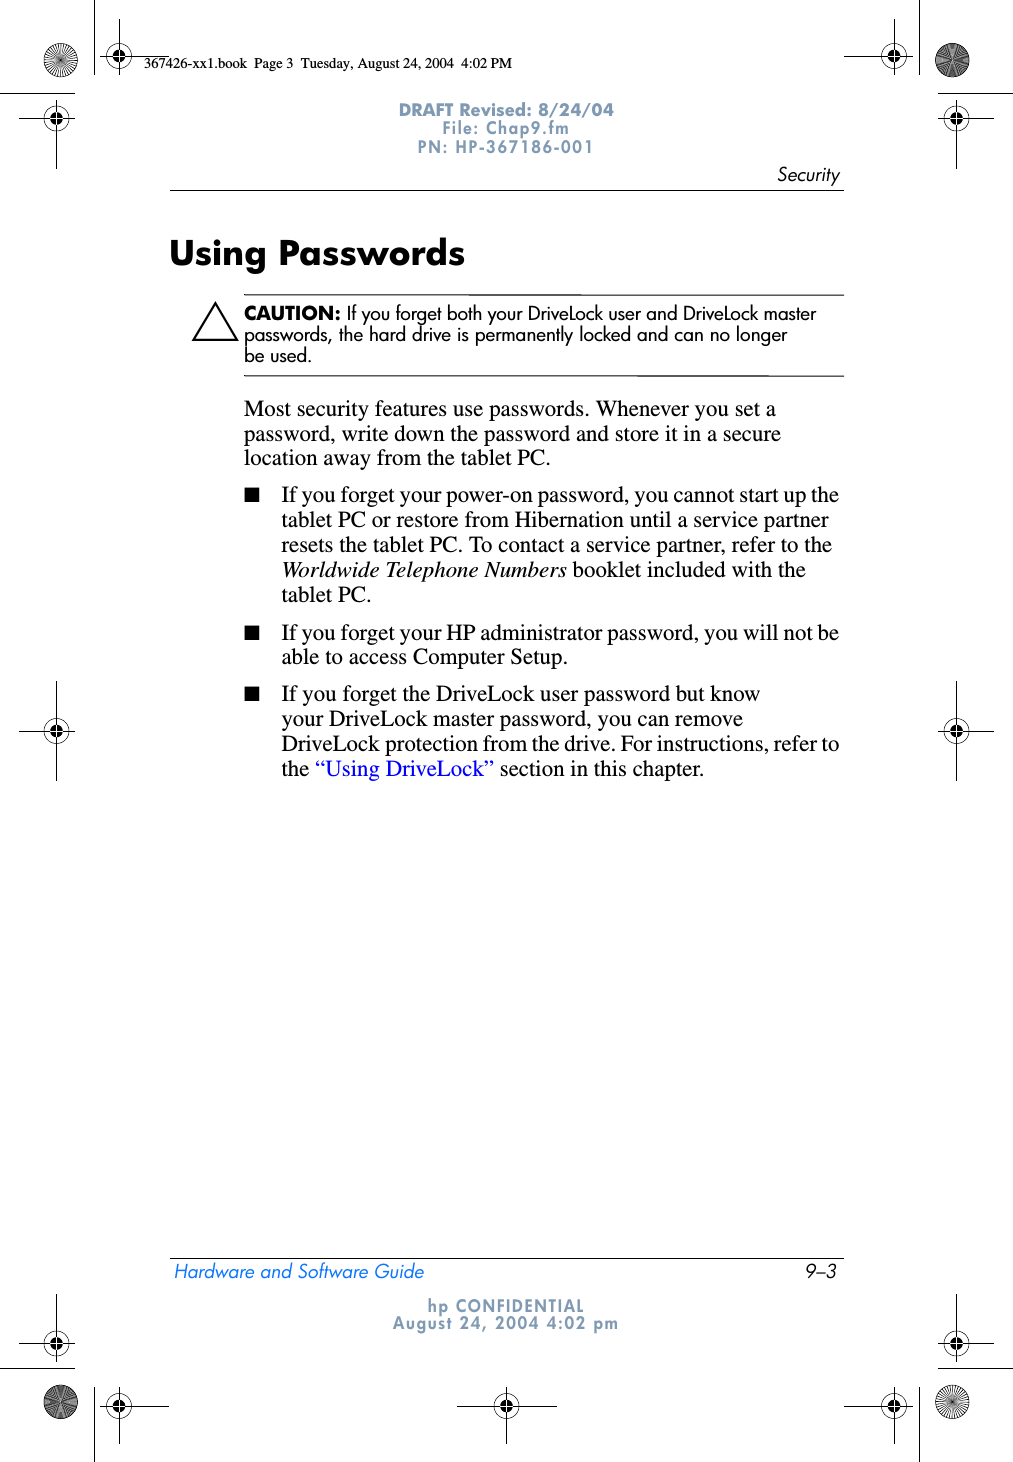 SecurityHardware and Software Guide 9–3DRAFT Revised: 8/24/04File: Chap9.fm PN: HP-367186-001 hp CONFIDENTIALAugust 24, 2004 4:02 pmUsing PasswordsÄCAUTION: If you forget both your DriveLock user and DriveLock master passwords, the hard drive is permanently locked and can no longer be used.Most security features use passwords. Whenever you set a password, write down the password and store it in a secure location away from the tablet PC.■If you forget your power-on password, you cannot start up the tablet PC or restore from Hibernation until a service partner resets the tablet PC. To contact a service partner, refer to the Worldwide Telephone Numbers booklet included with the tablet PC.■If you forget your HP administrator password, you will not be able to access Computer Setup.■If you forget the DriveLock user password but know your DriveLock master password, you can remove DriveLock protection from the drive. For instructions, refer to the “Using DriveLock” section in this chapter.367426-xx1.book  Page 3  Tuesday, August 24, 2004  4:02 PM